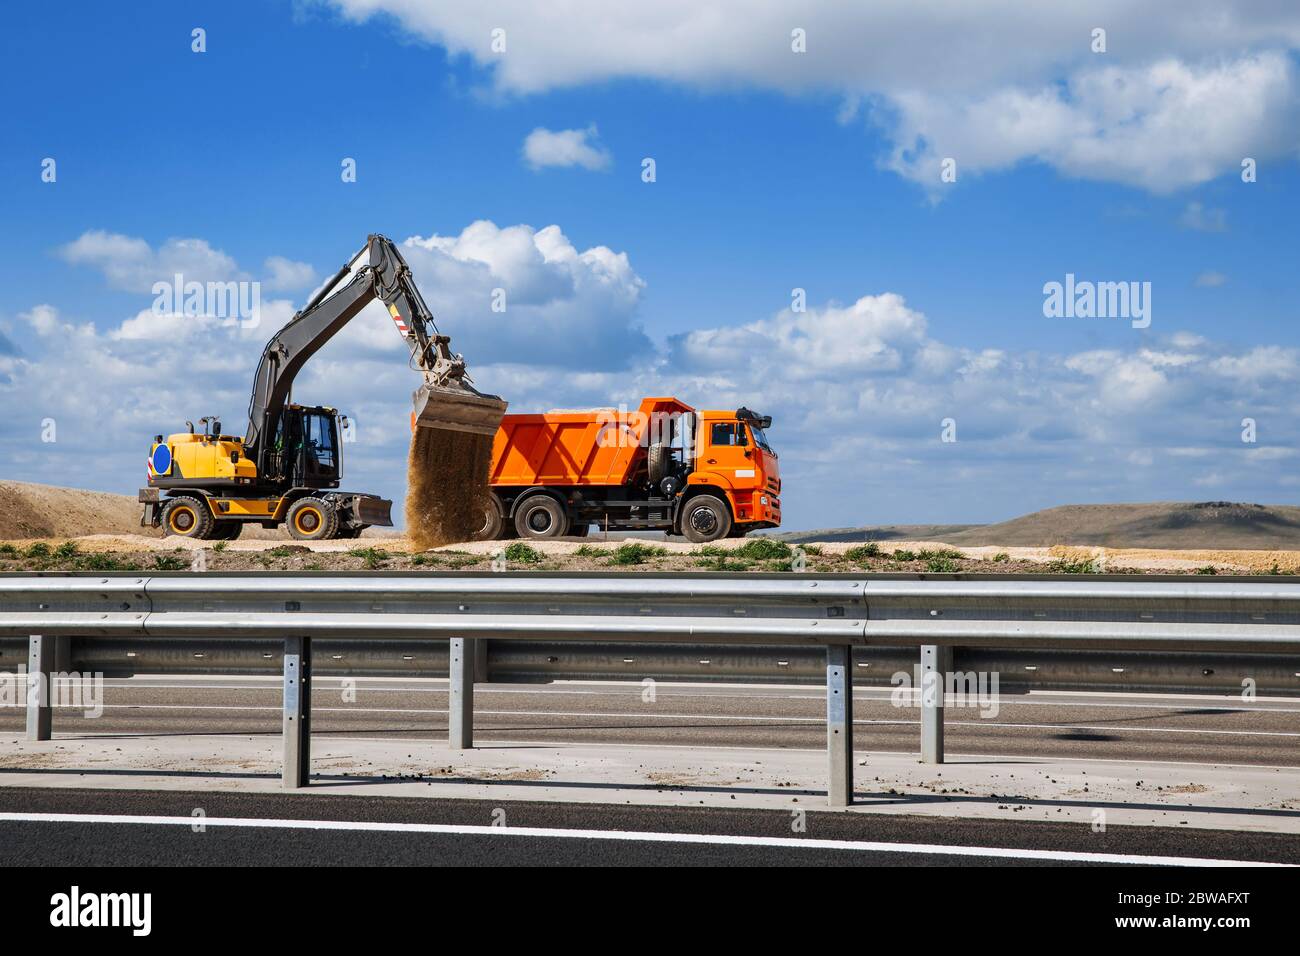 Excavator Loading Truck High Resolution Stock Photography and Images - Alamy